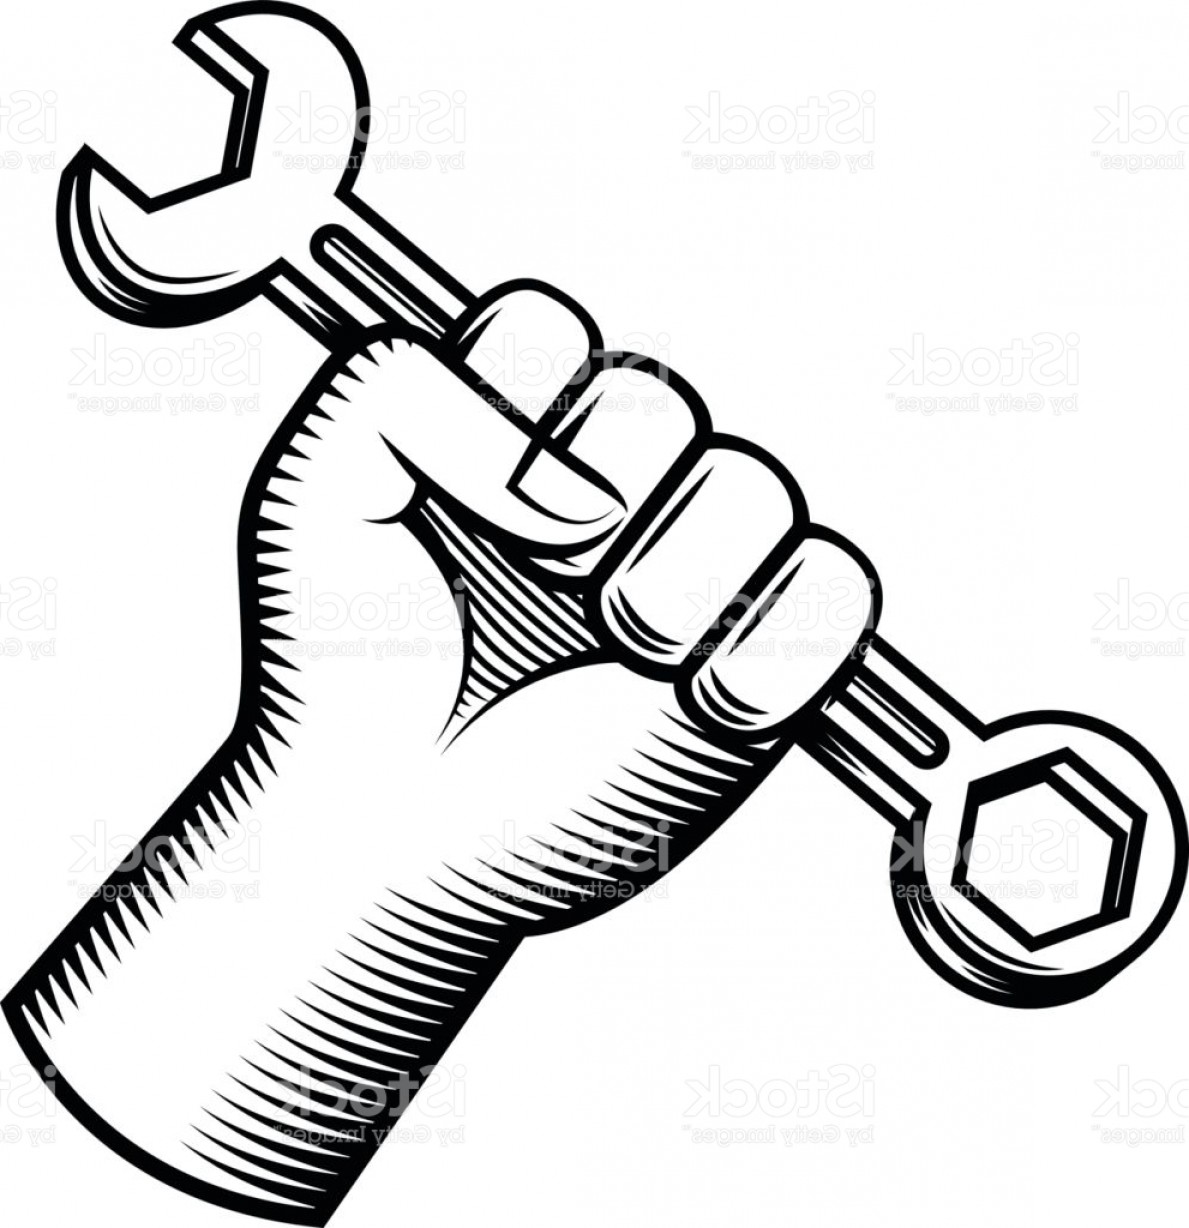 Wrench In Hand Clipart Black And White.